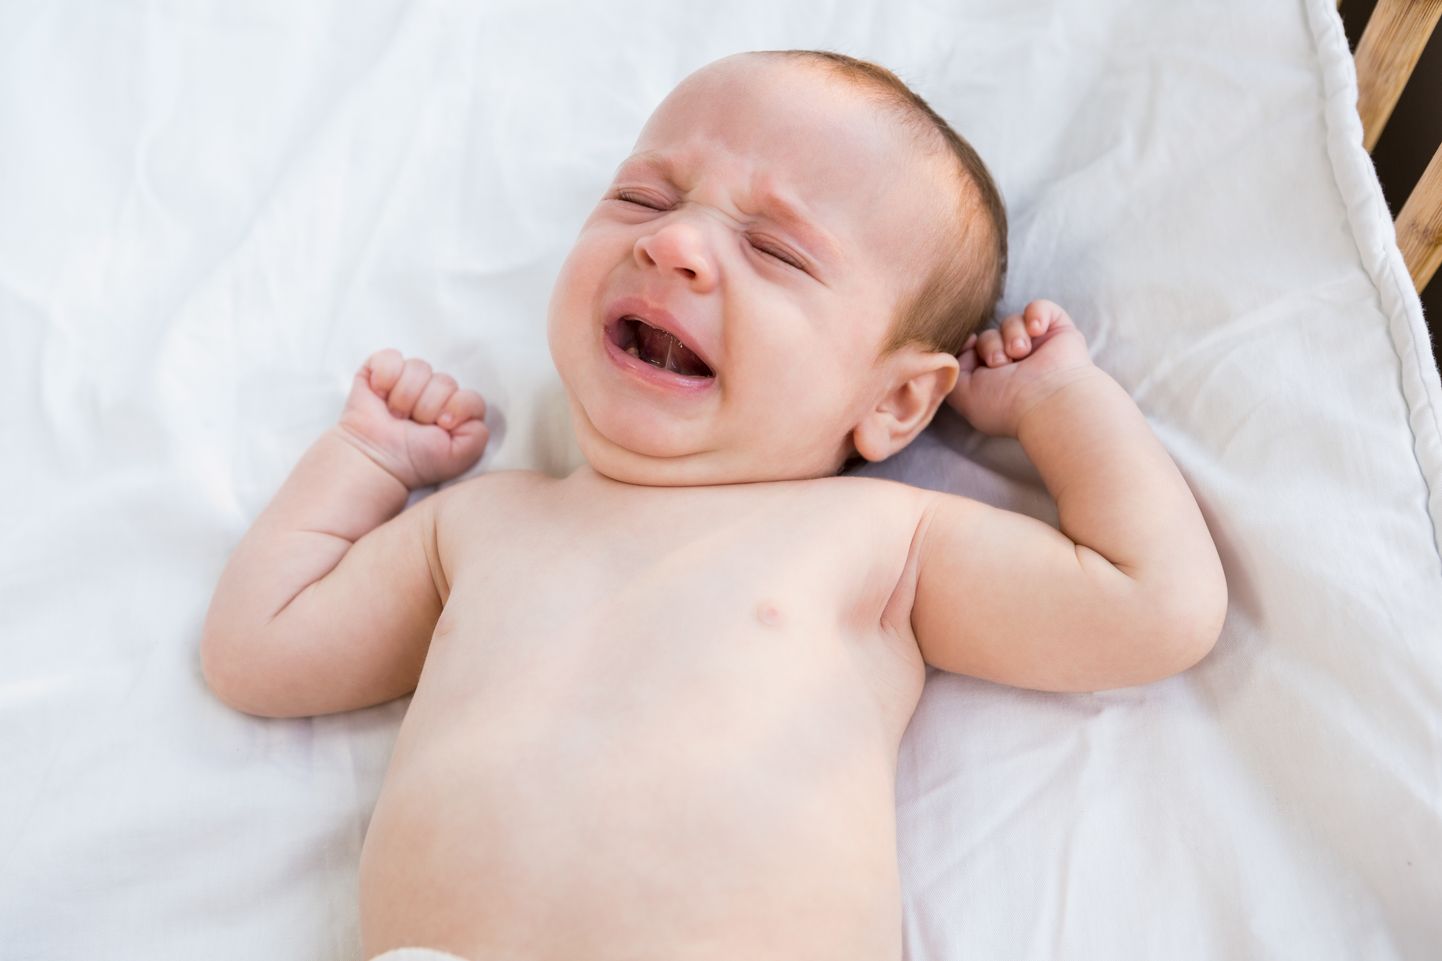 Close-up of crying baby on baby bed